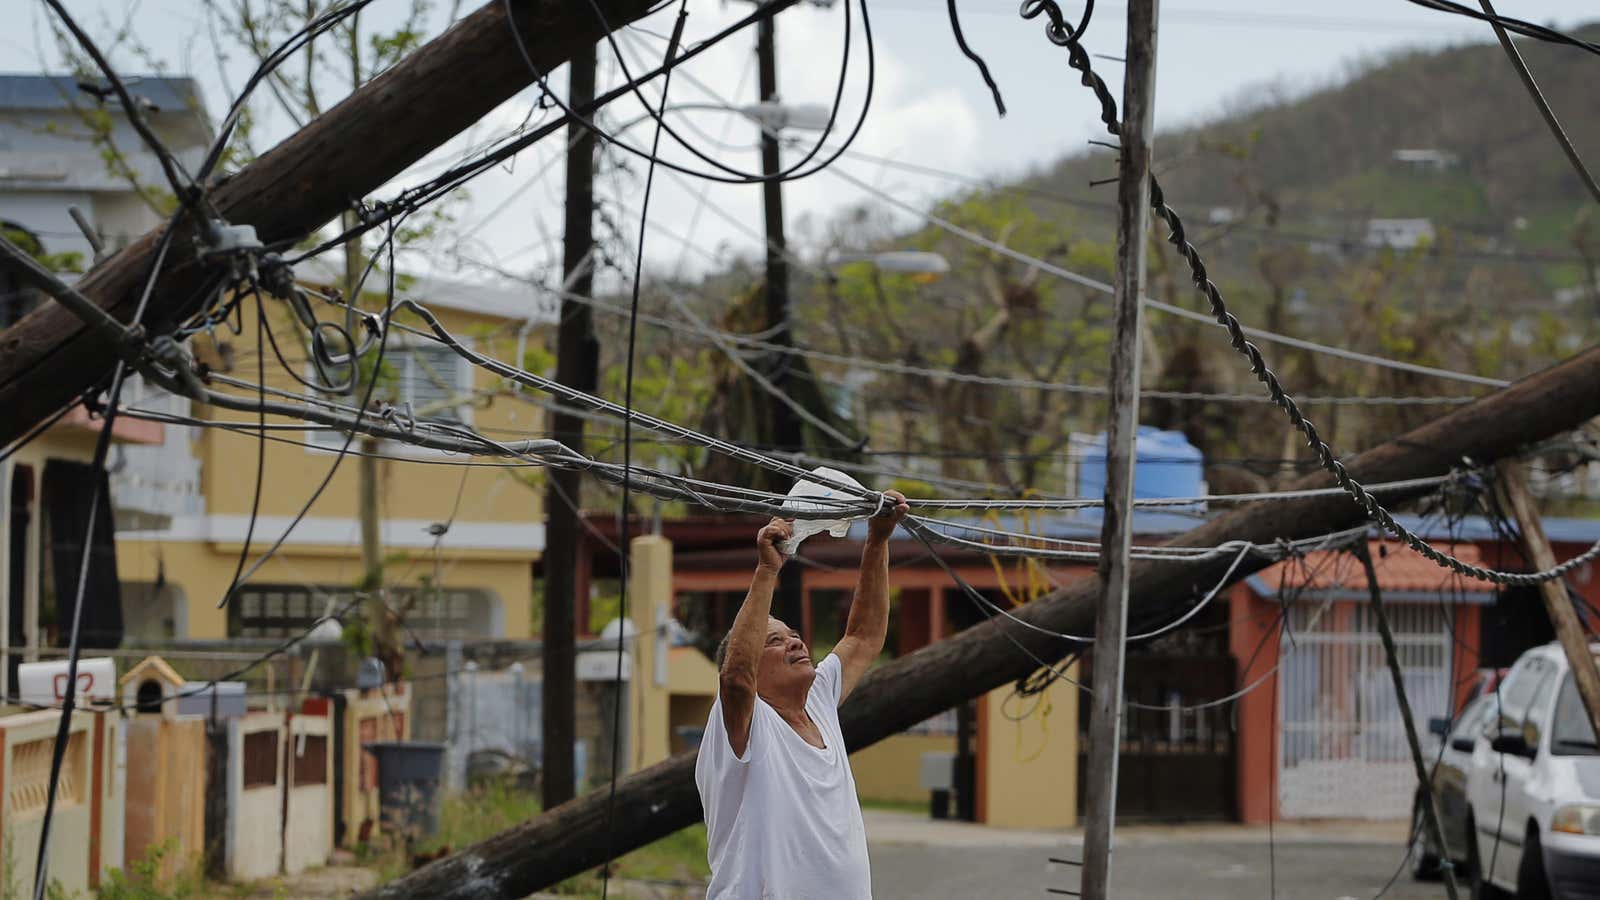 Puerto Rico’s electric infrastructure was demolished in Maria.